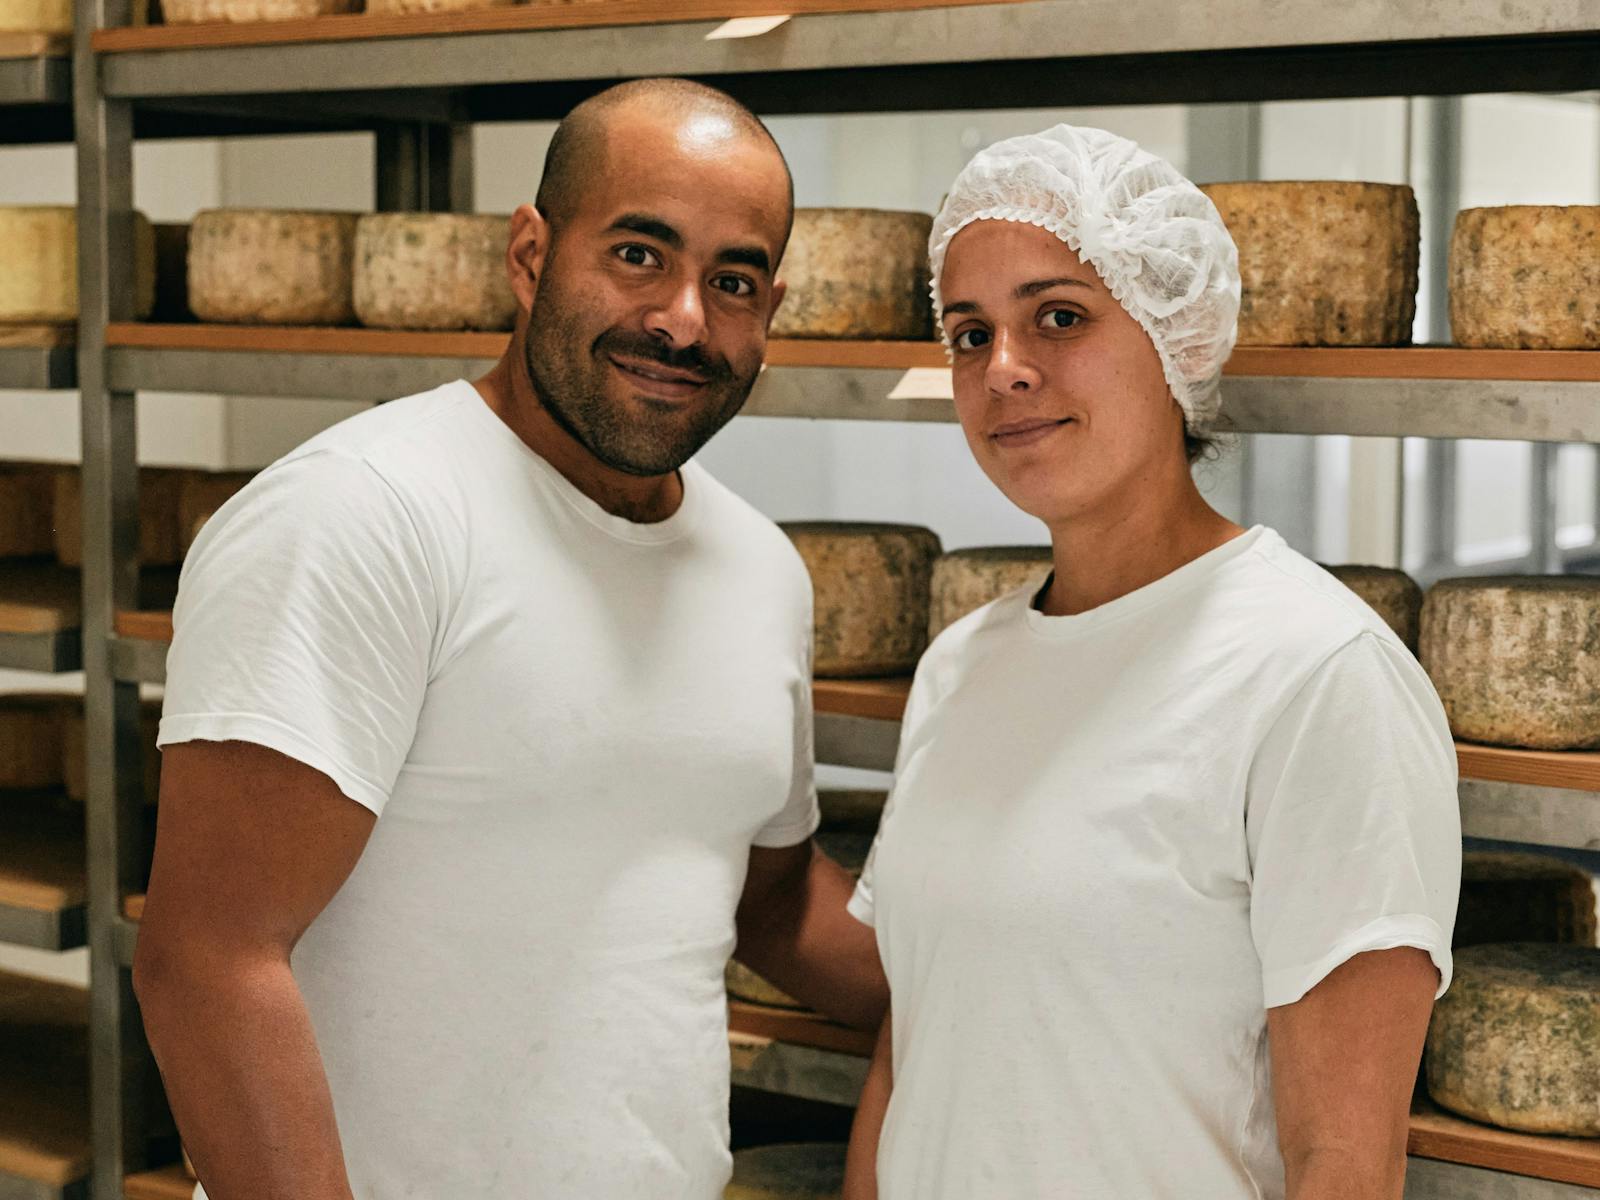 Rosselyn and Genaro the cheese makers standing in front of shelves of cheese.